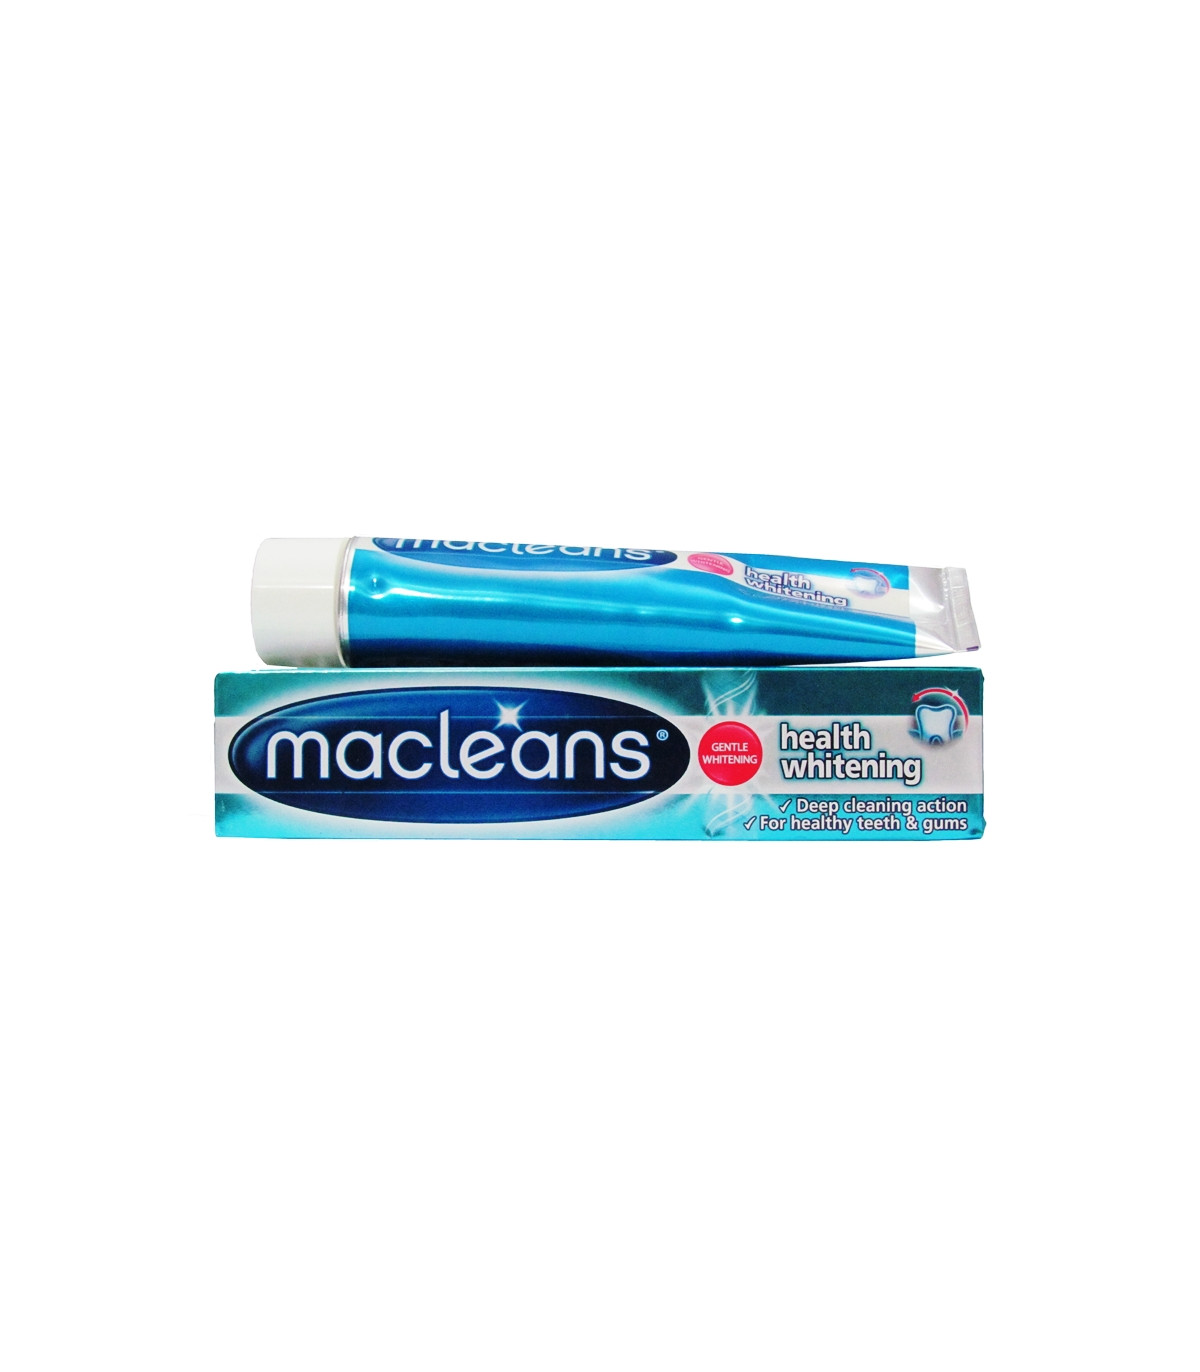 Macleans Health Whitening Toothpaste – 100ml